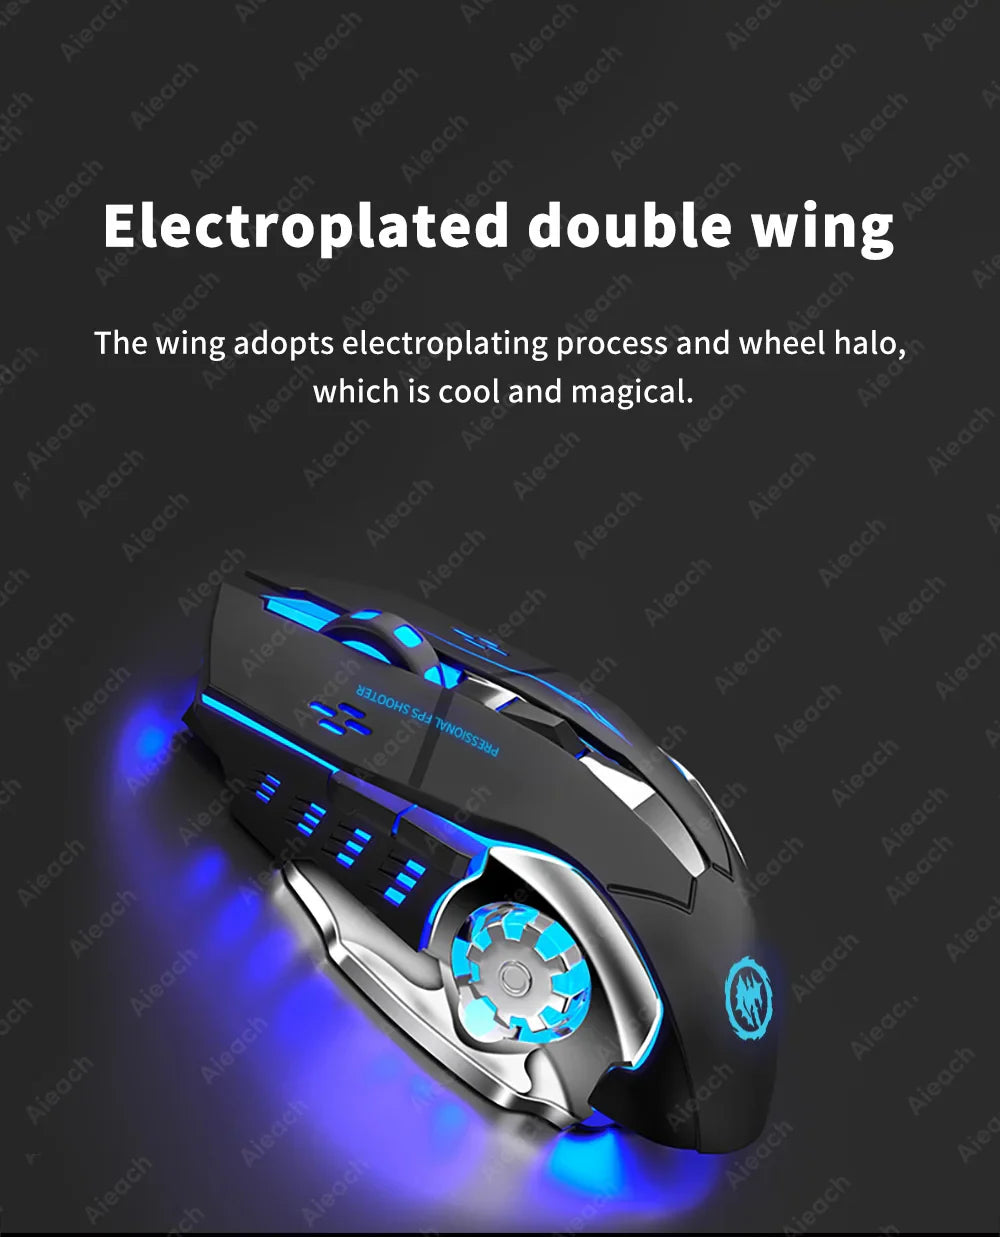 a computer mouse with blue light on it